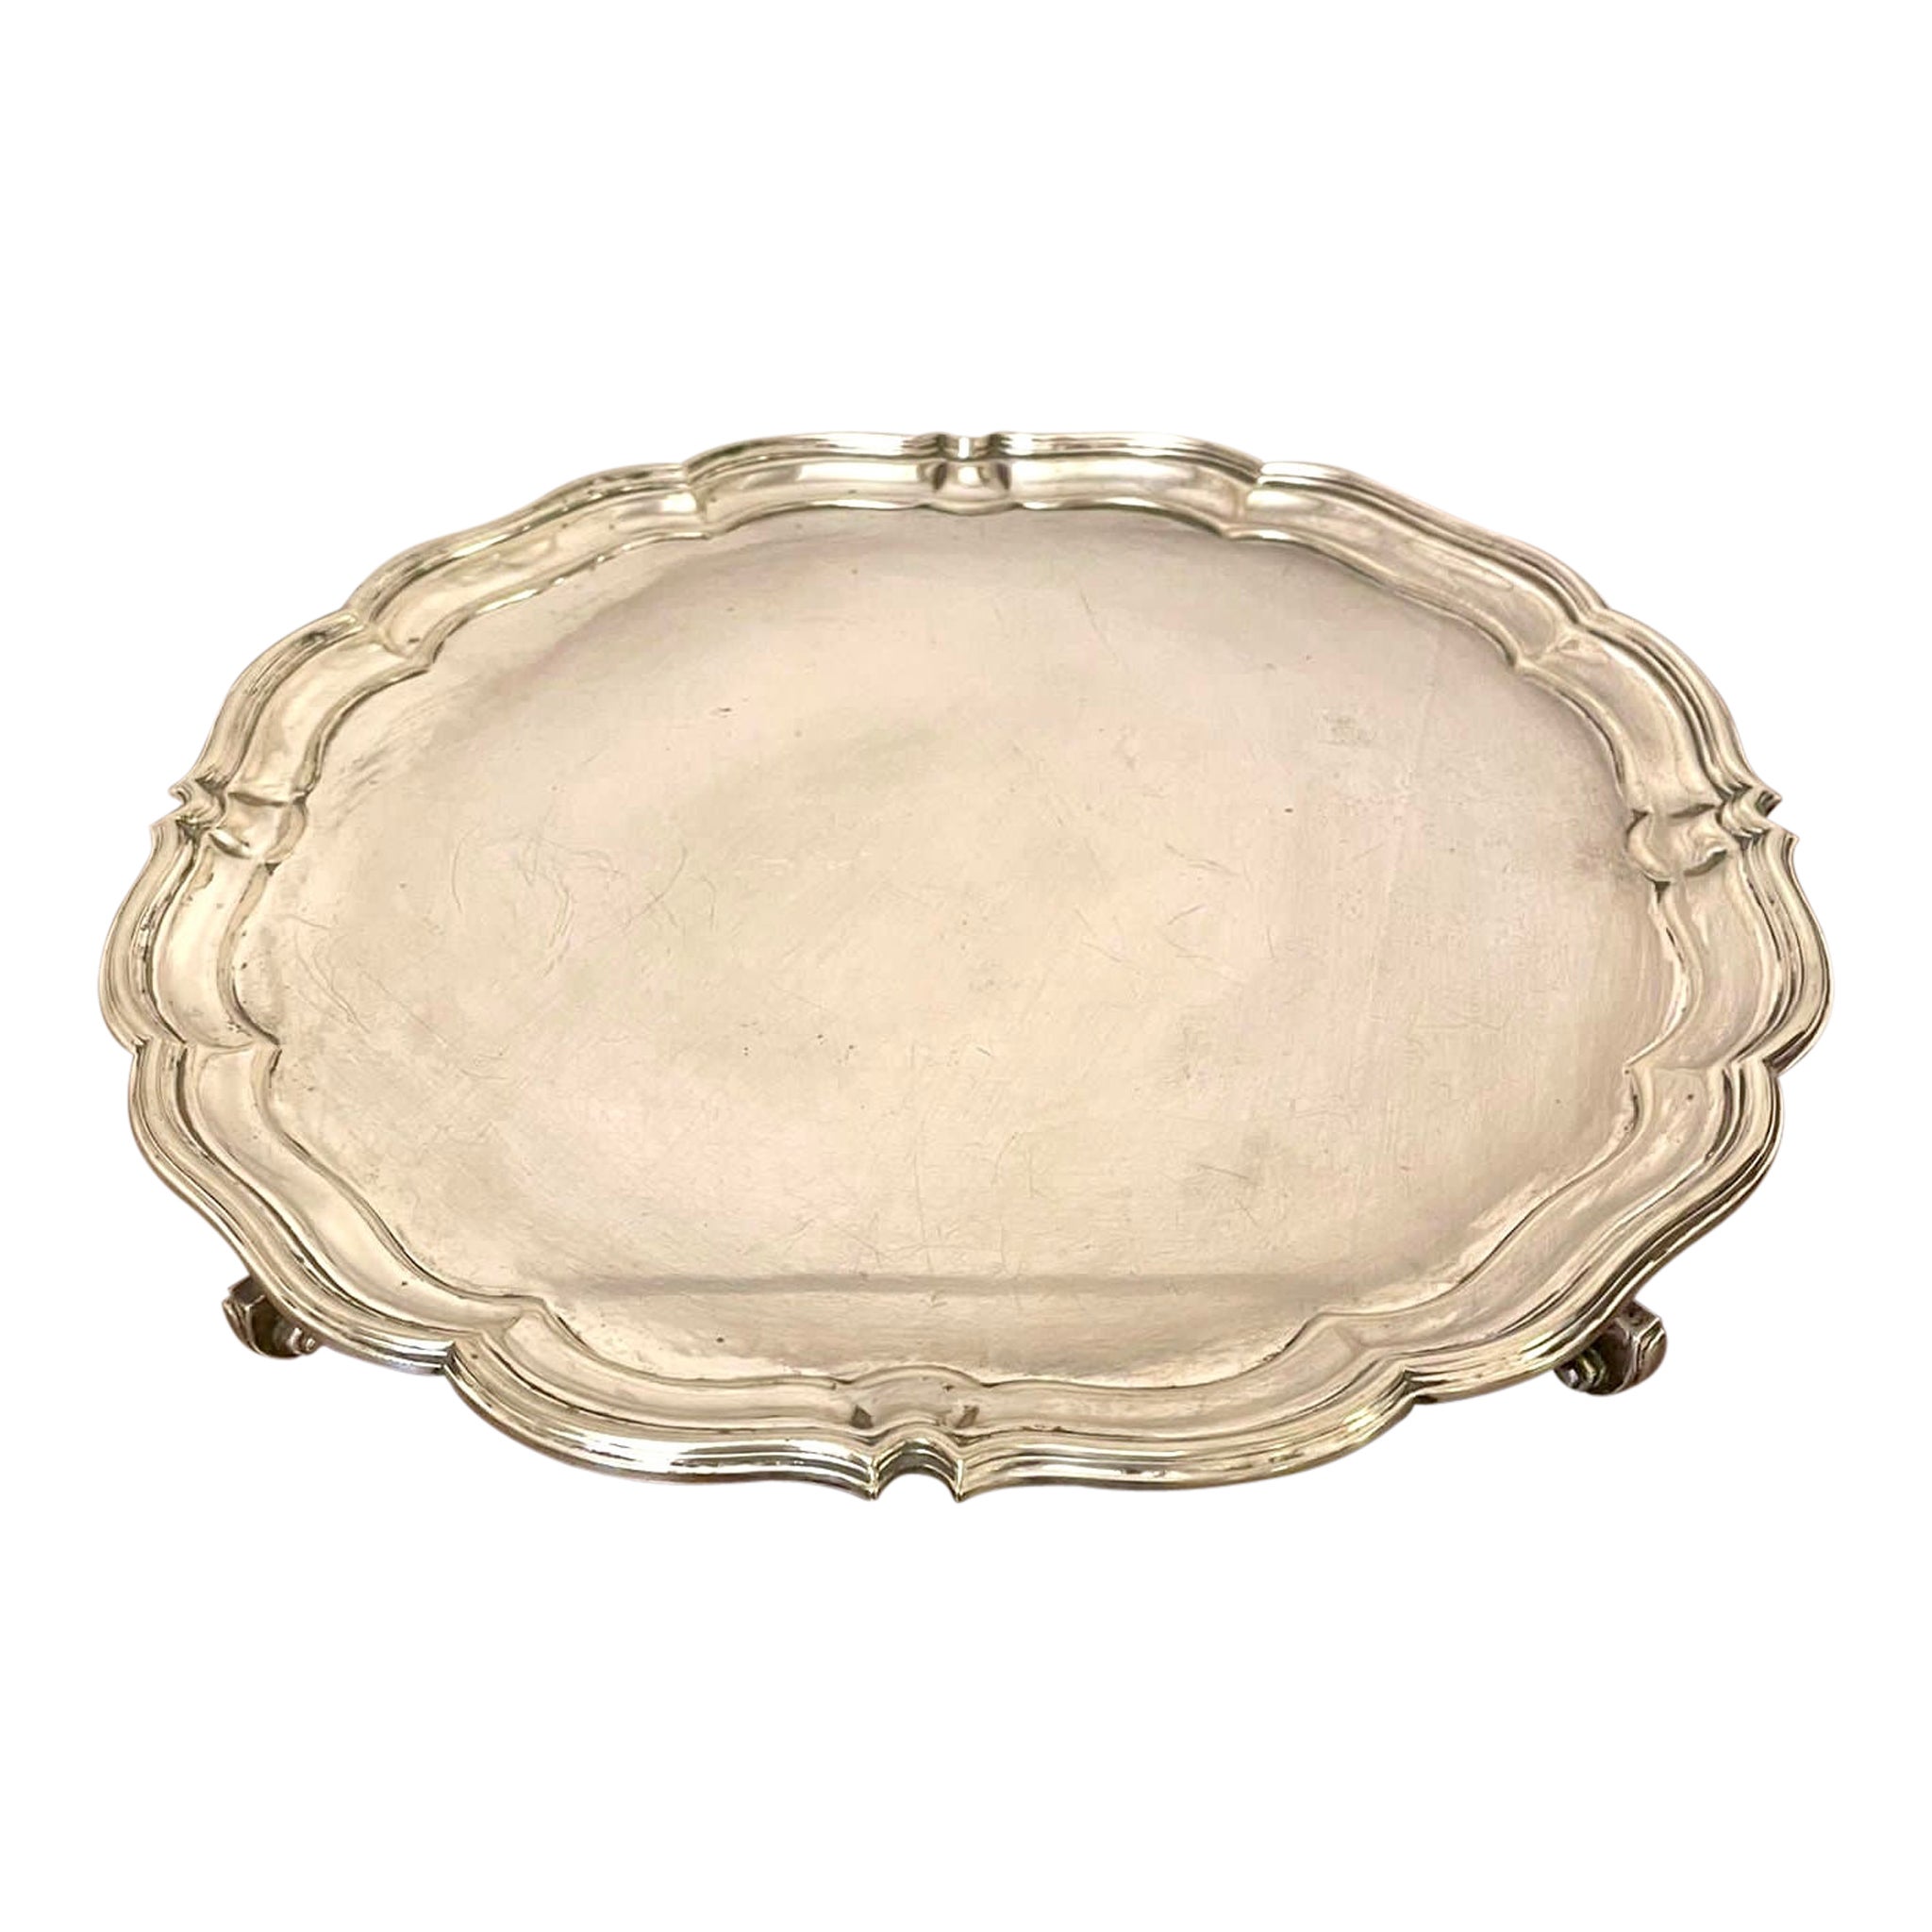 Antique Edwardian Quality Silver Plated Tray